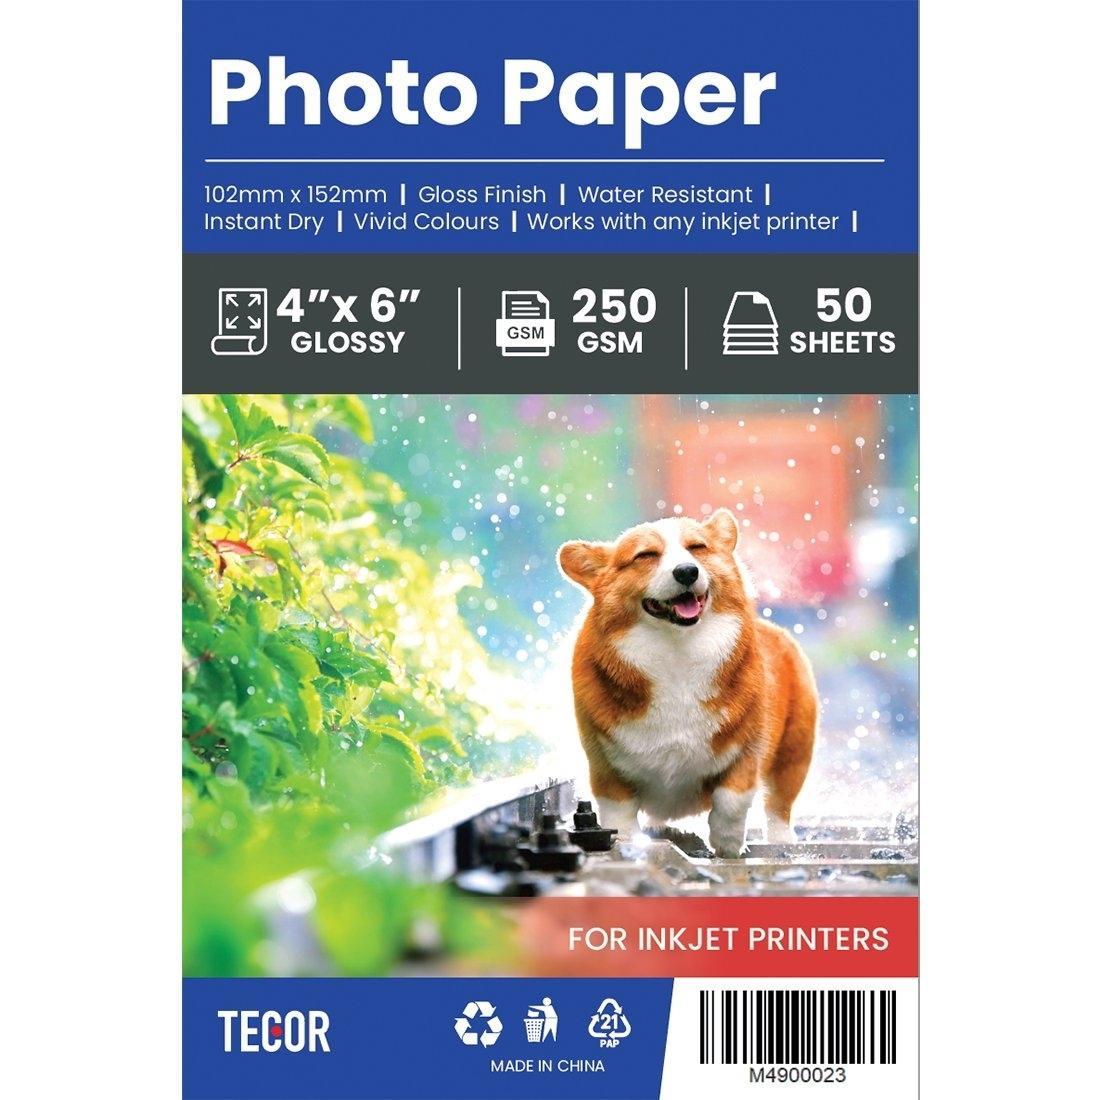 Glossy Cast Coated Photo Paper 250GSM 4 x 6 inches for Inkjet Printers - 50 sheets